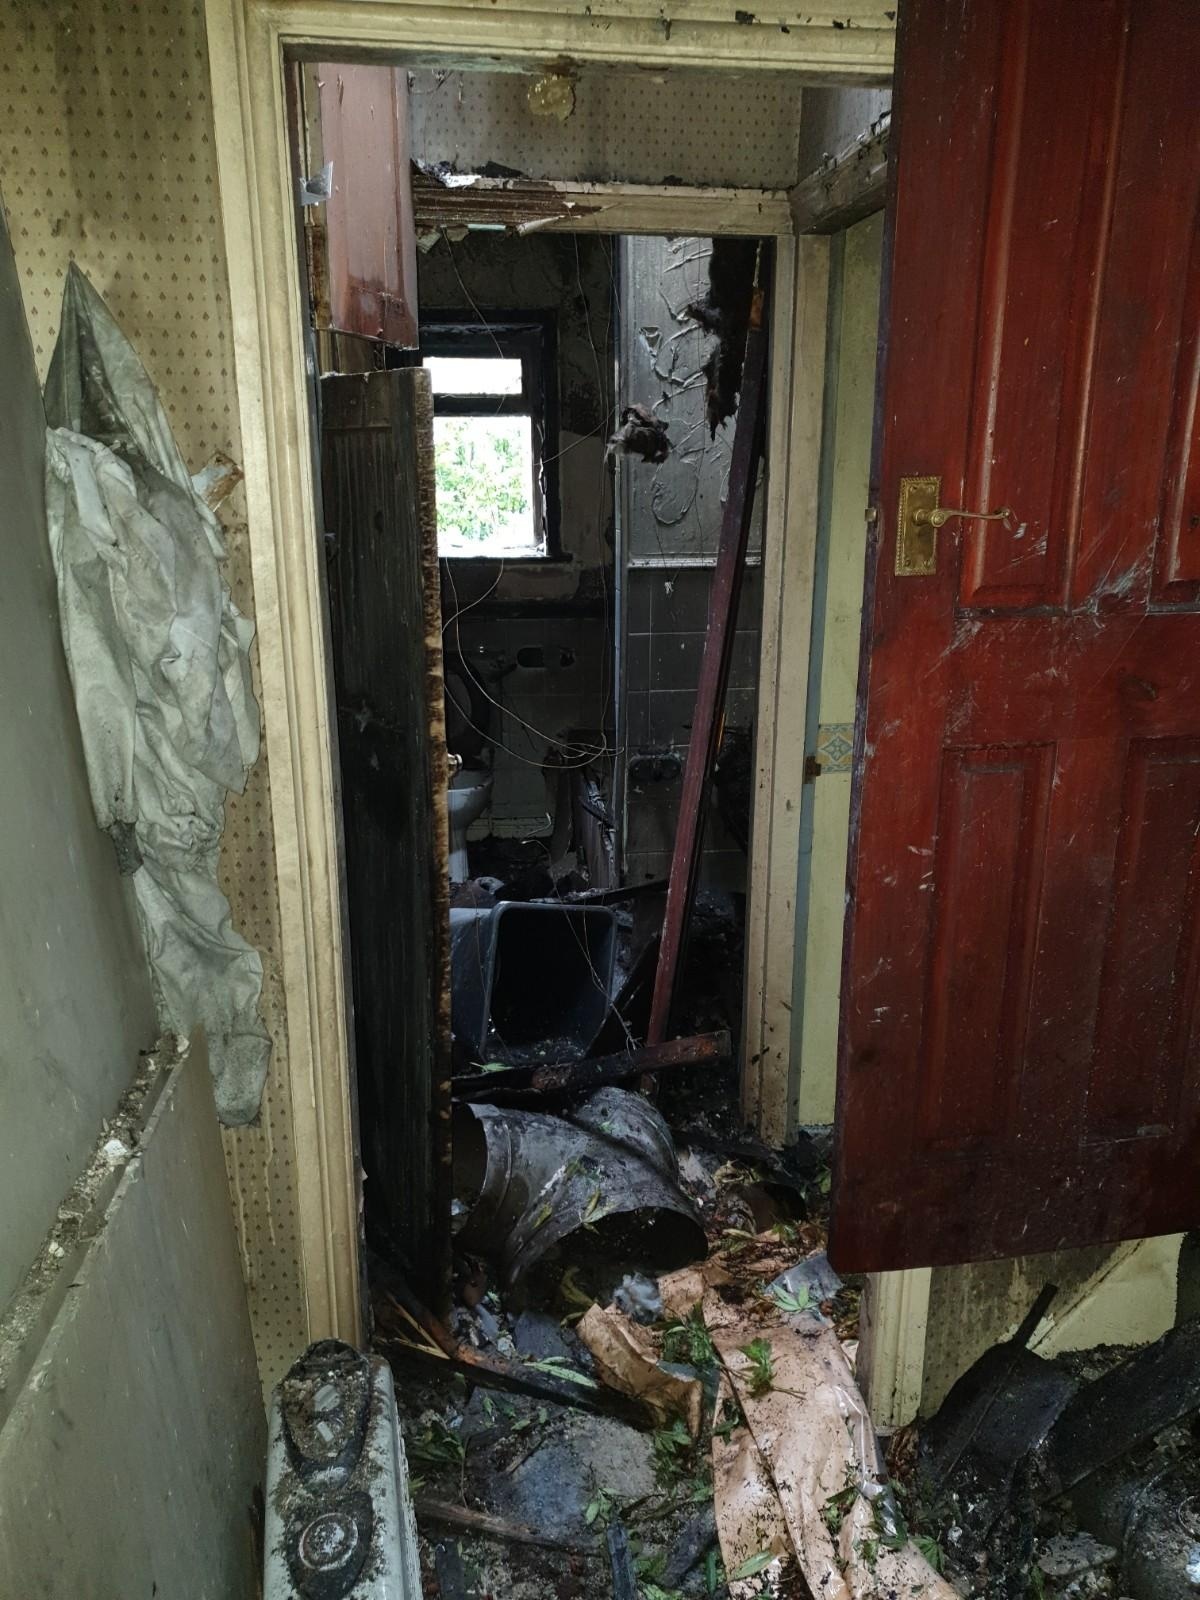 A cannbis farm was found after a Bacup property caught fire